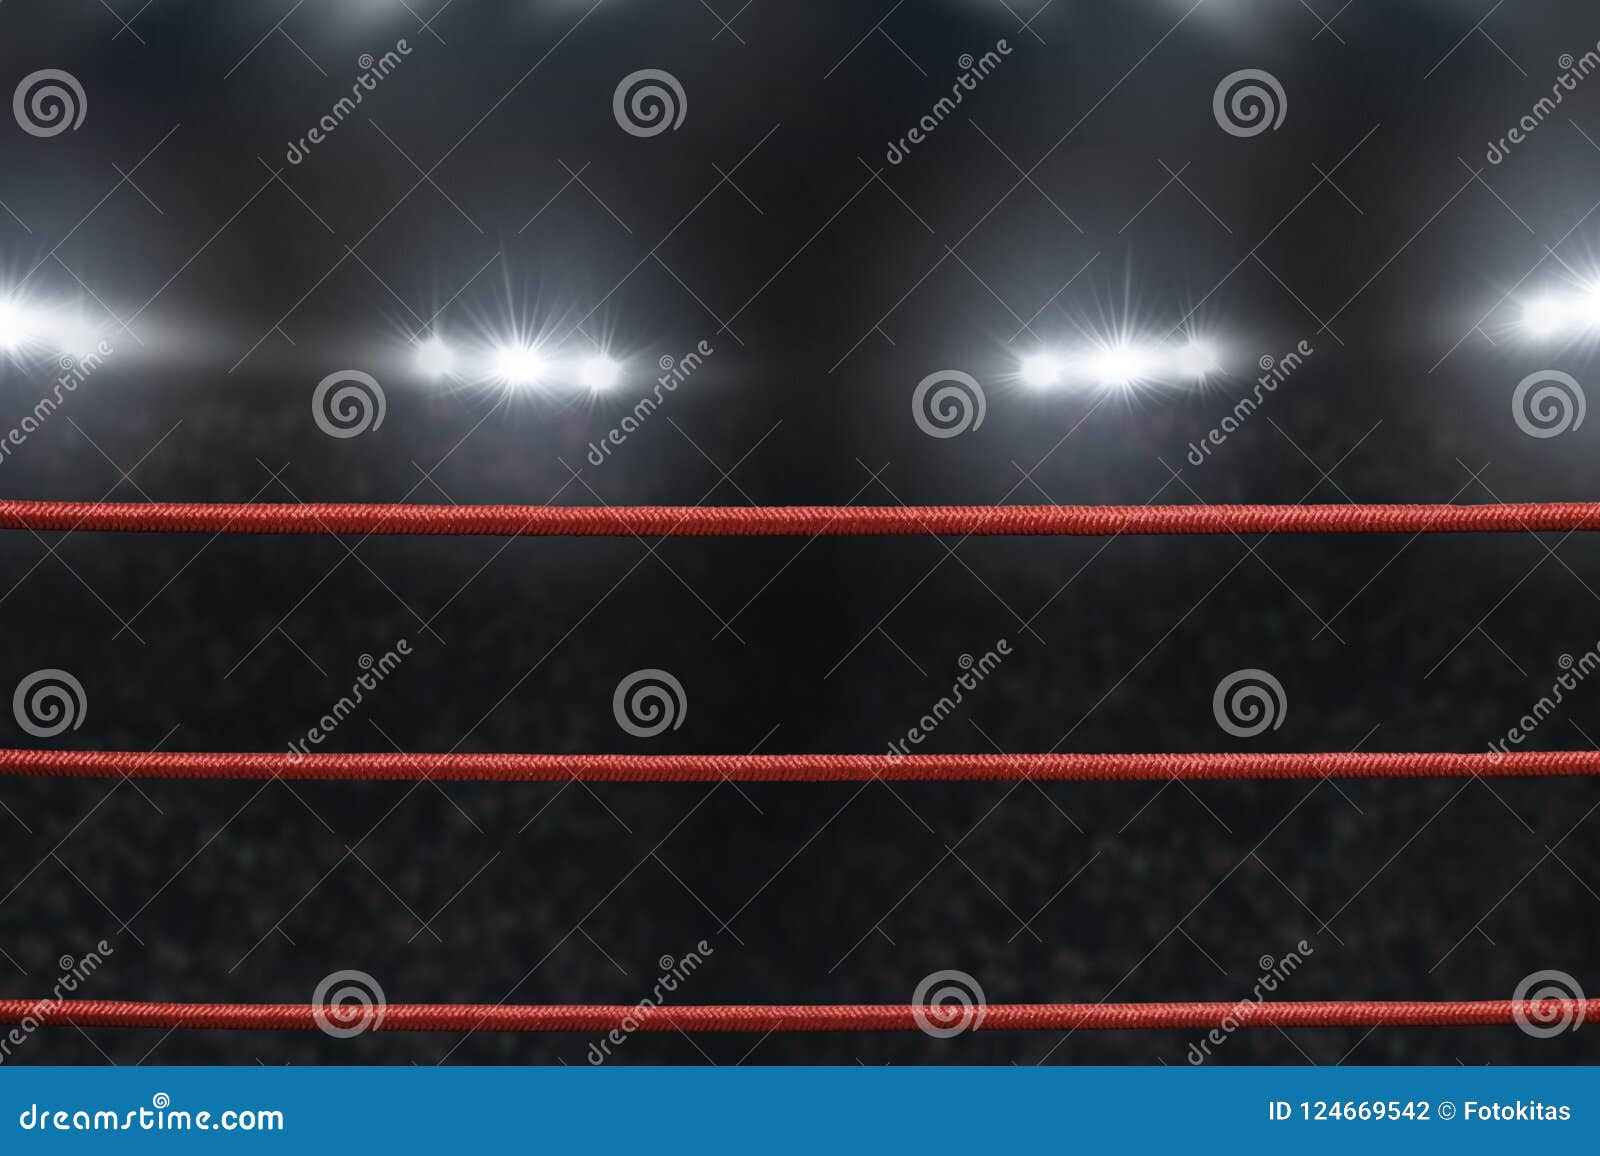 view of boxing ring rope